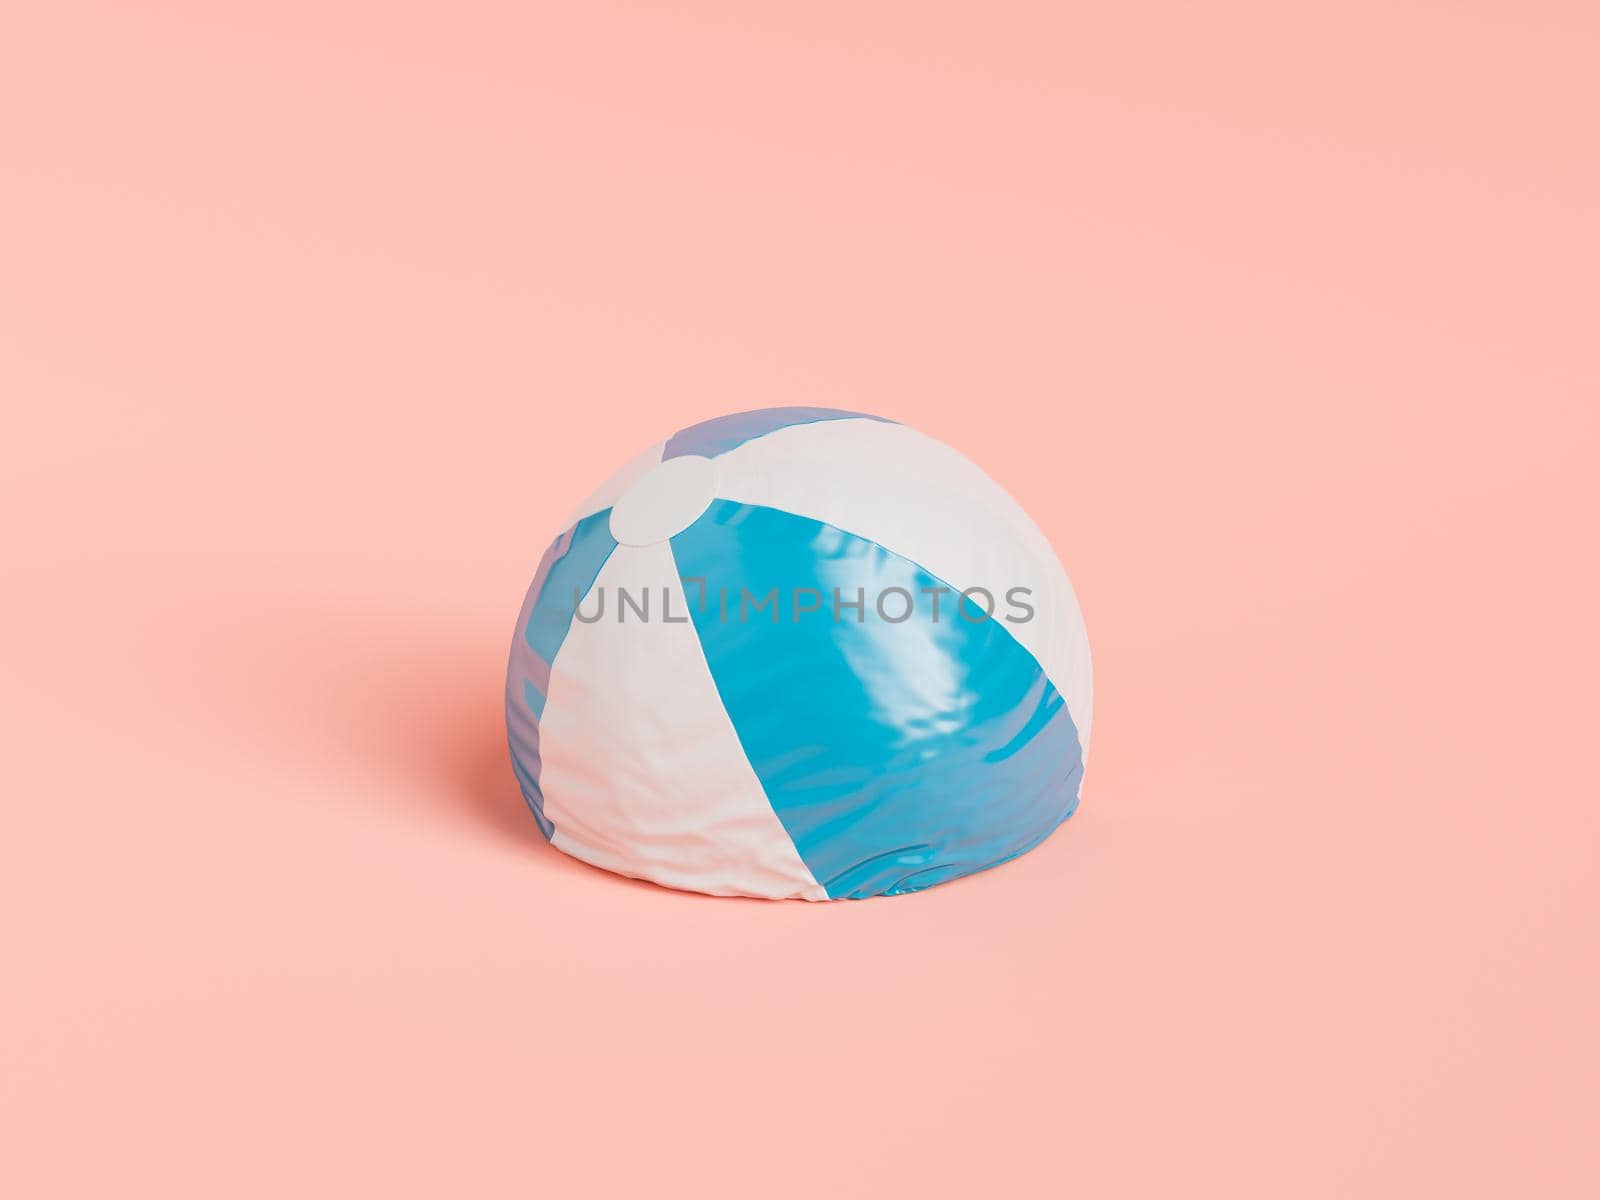 3D illustration of damaged blue and white beach ball placed on pink background during summer vacation